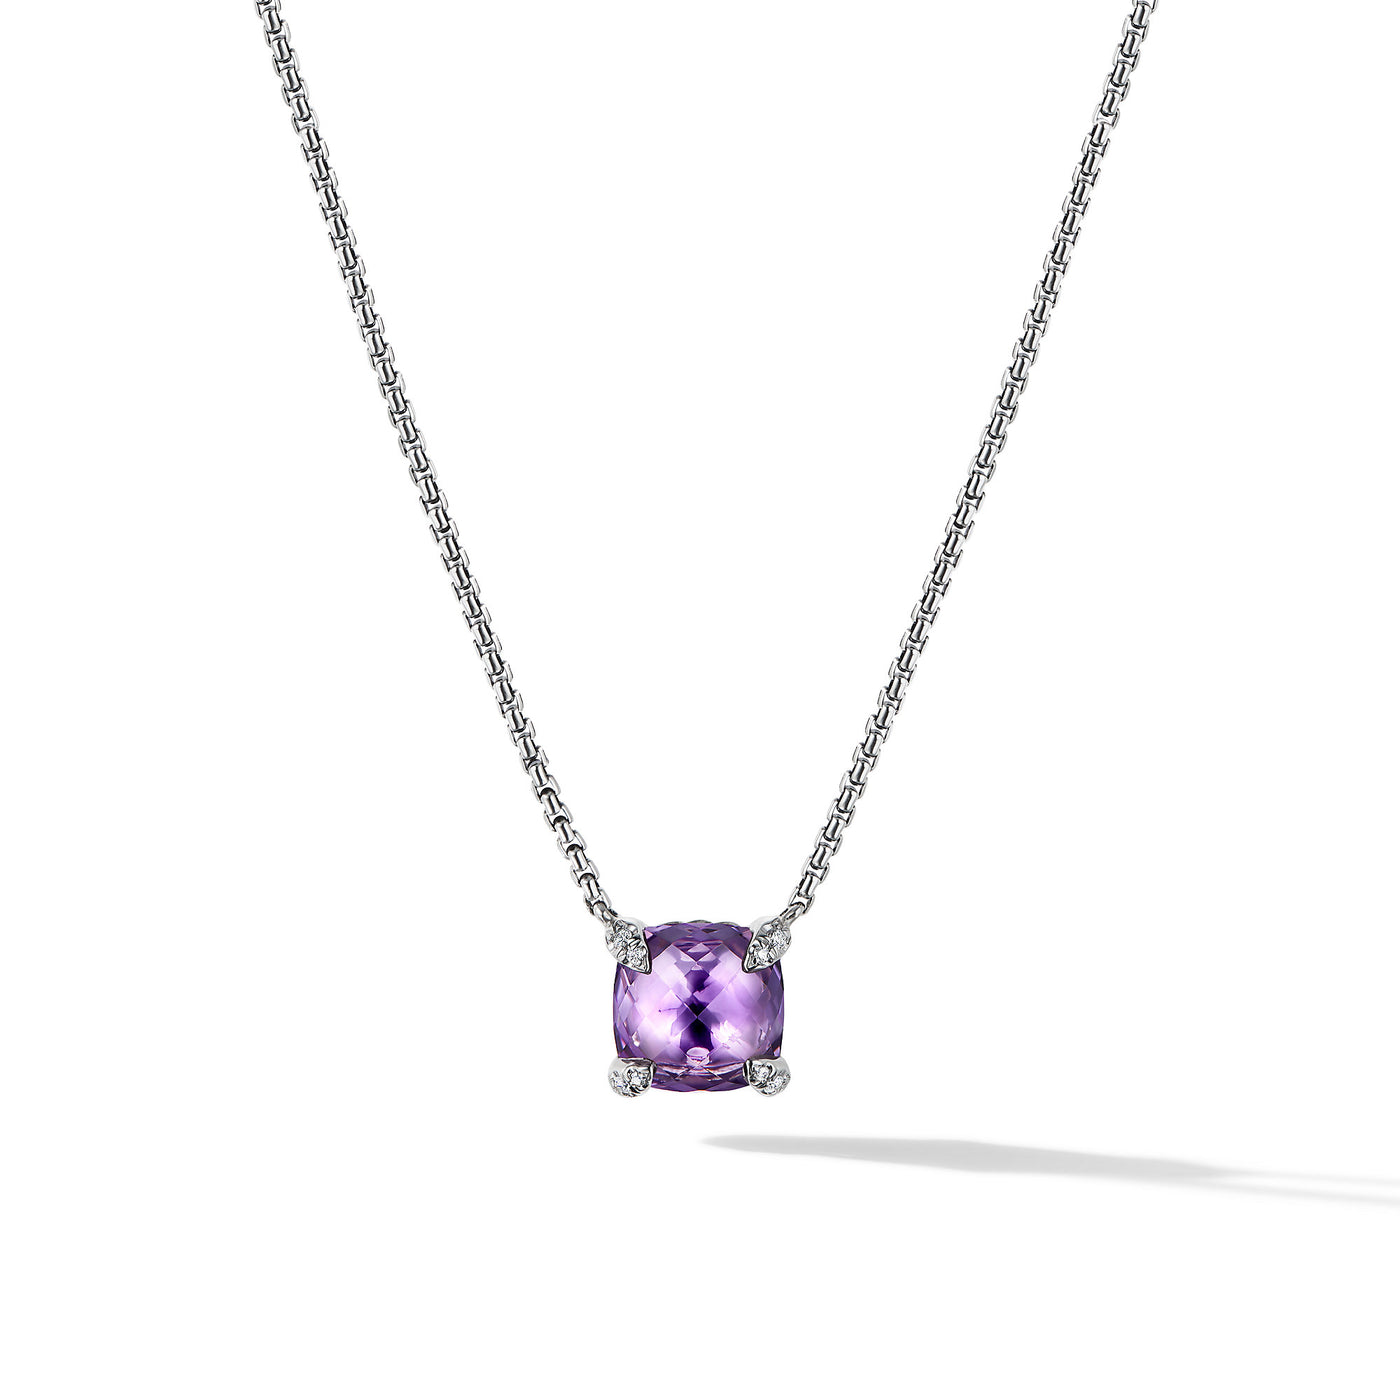 Petite Chatelaine® Pendant Necklace in Sterling Silver with Amethyst and Diamonds\, 9mm